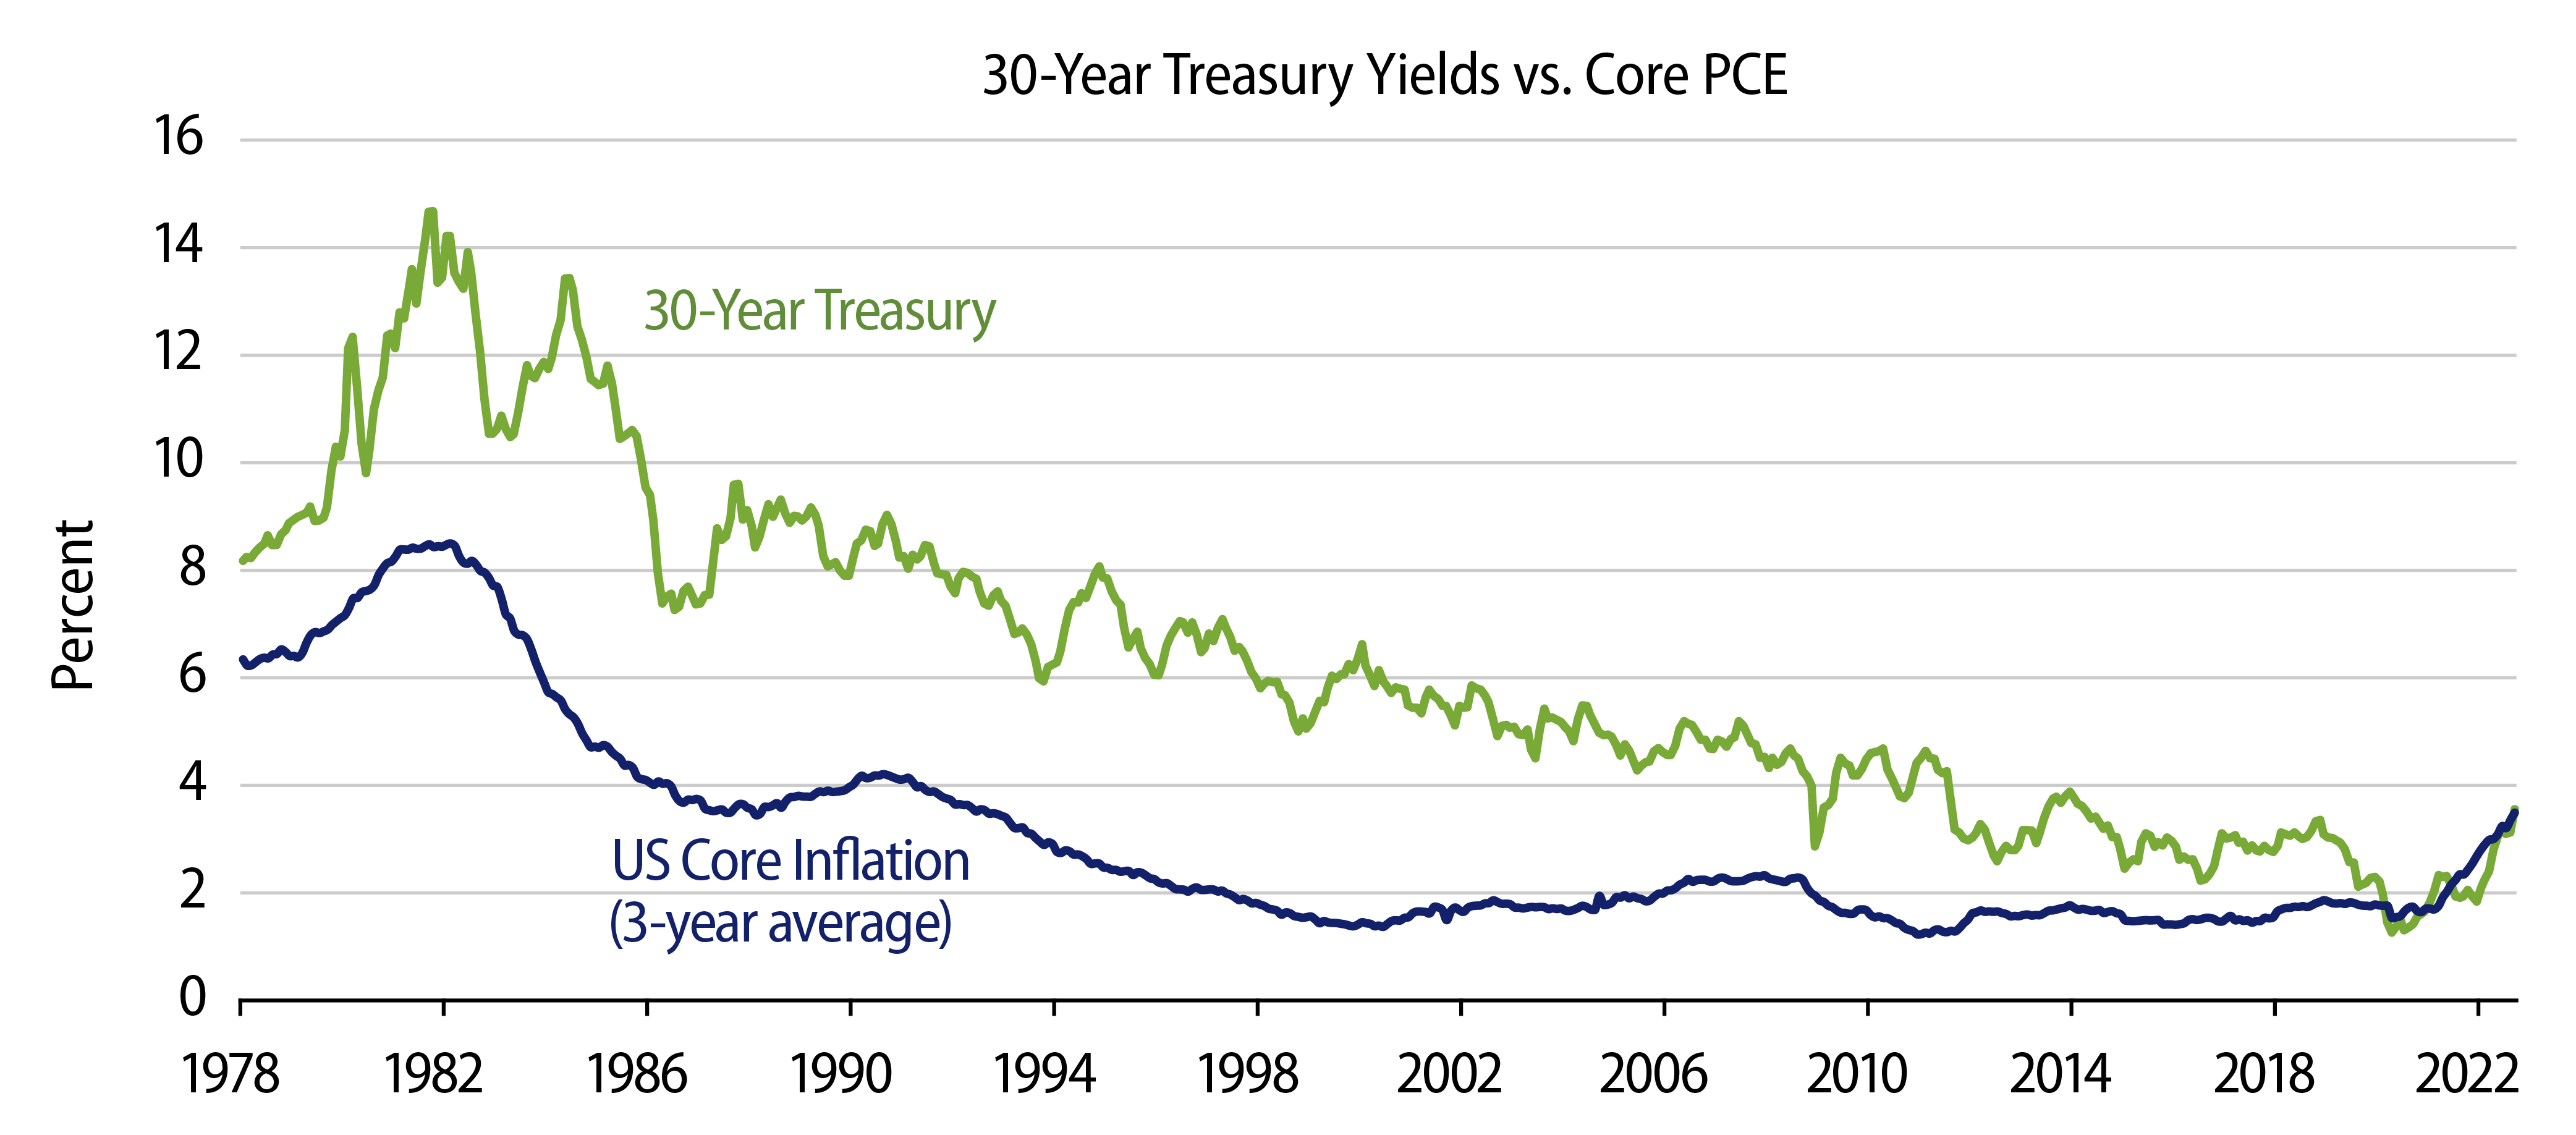 Long-Term Interest Rates Are Driven by Inflation